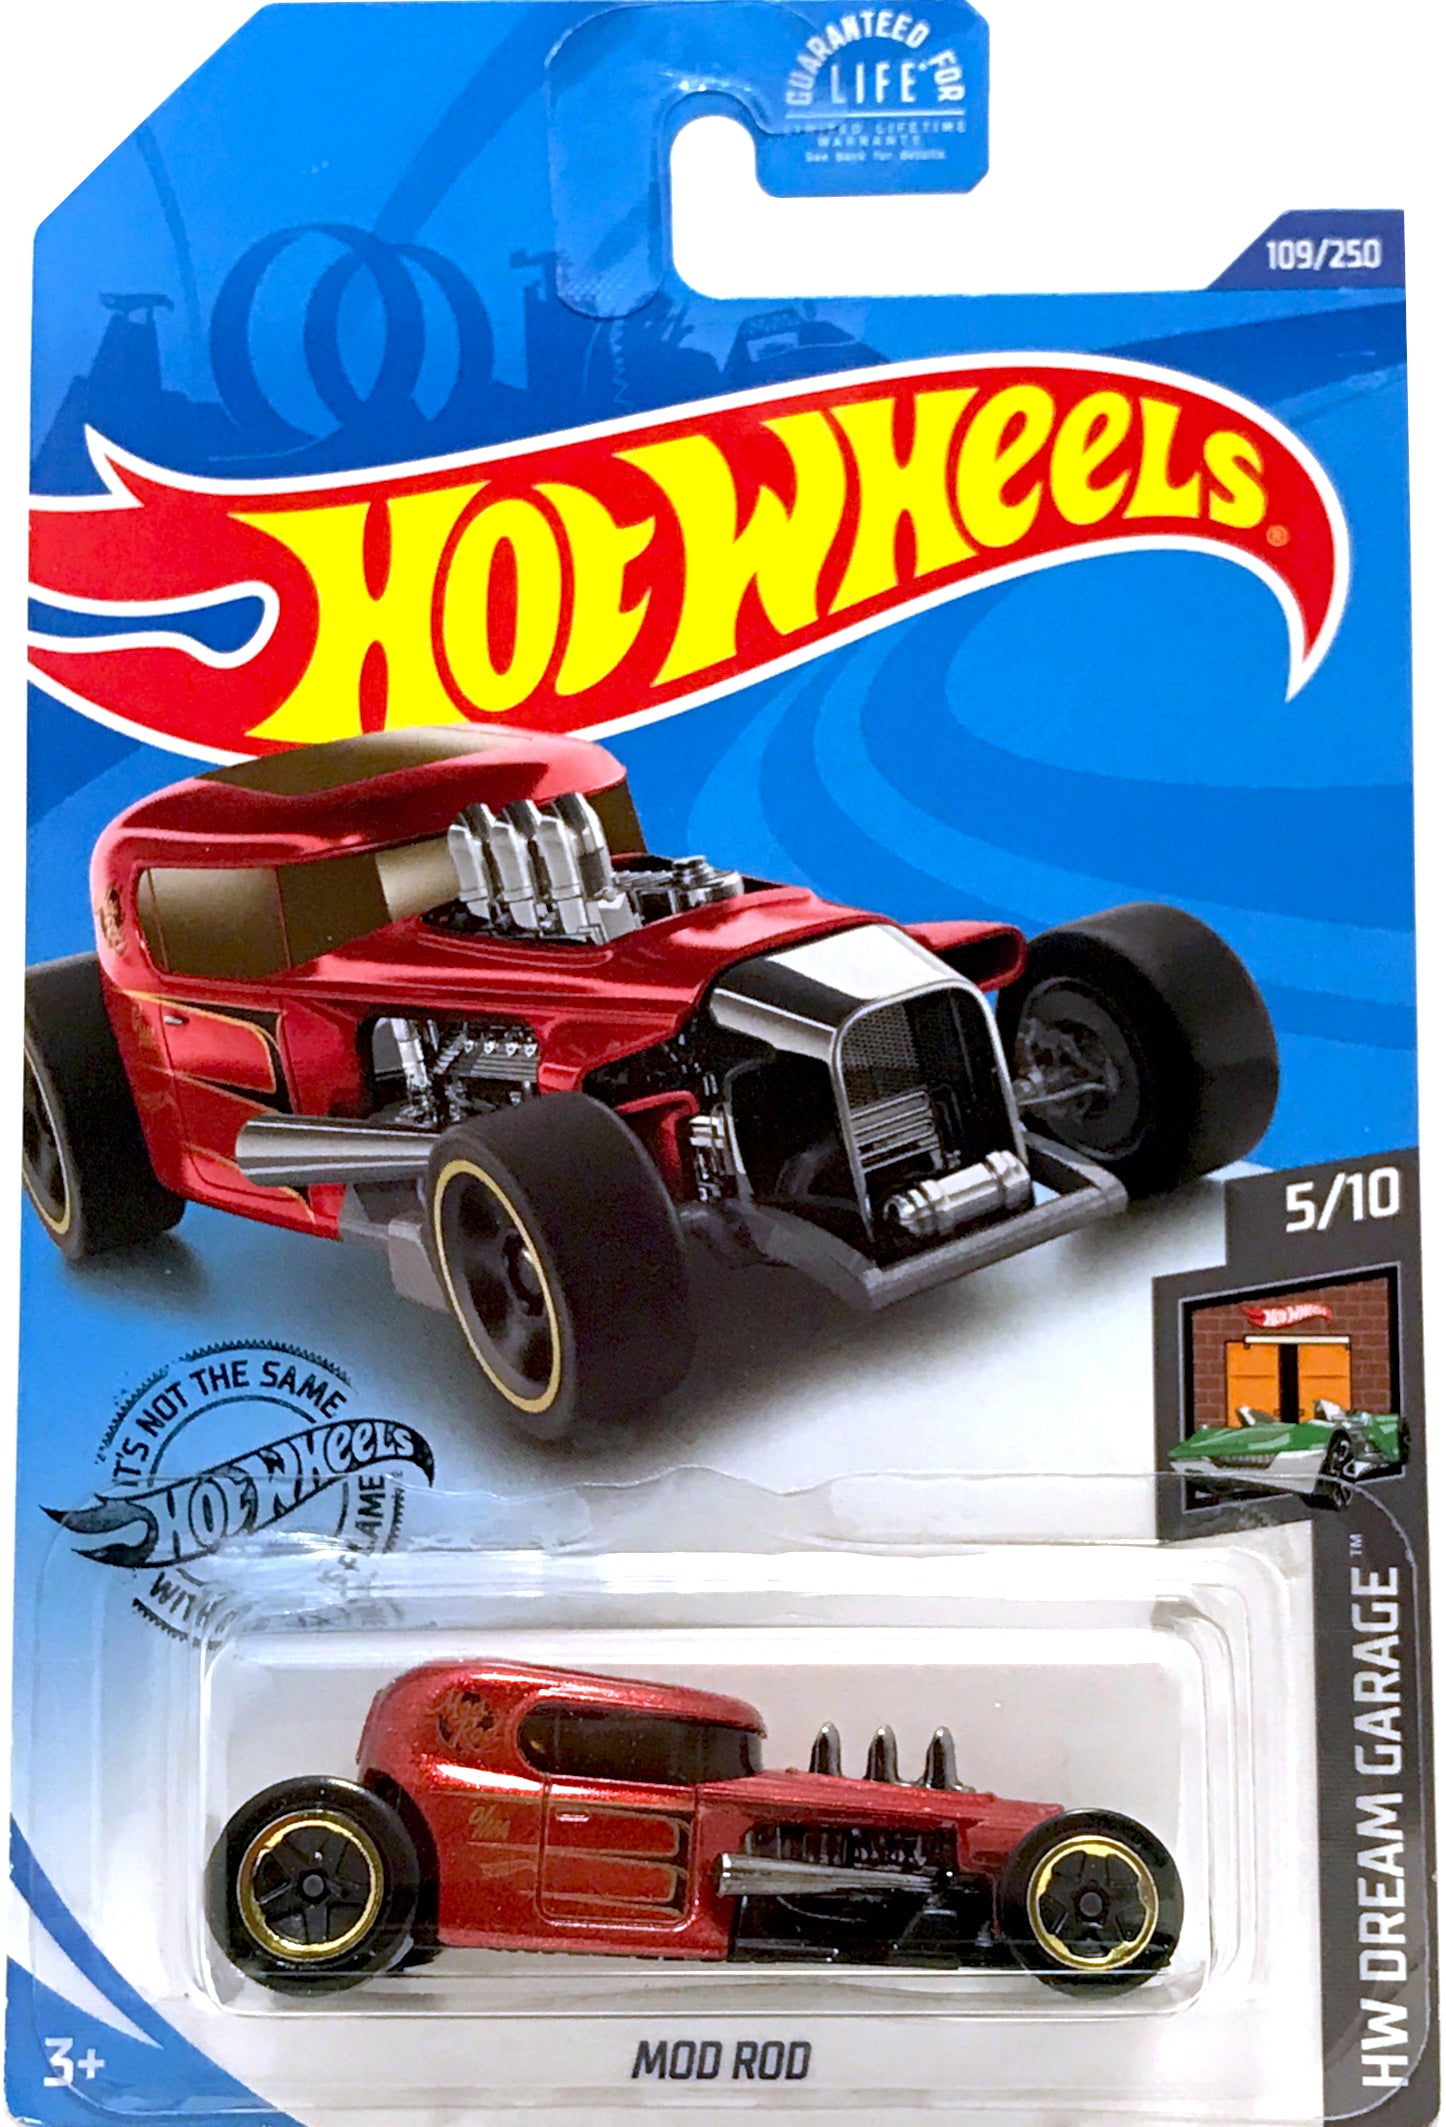 2020 Hot Wheels Mainline #109 - Mod Rod (Red) GHC24